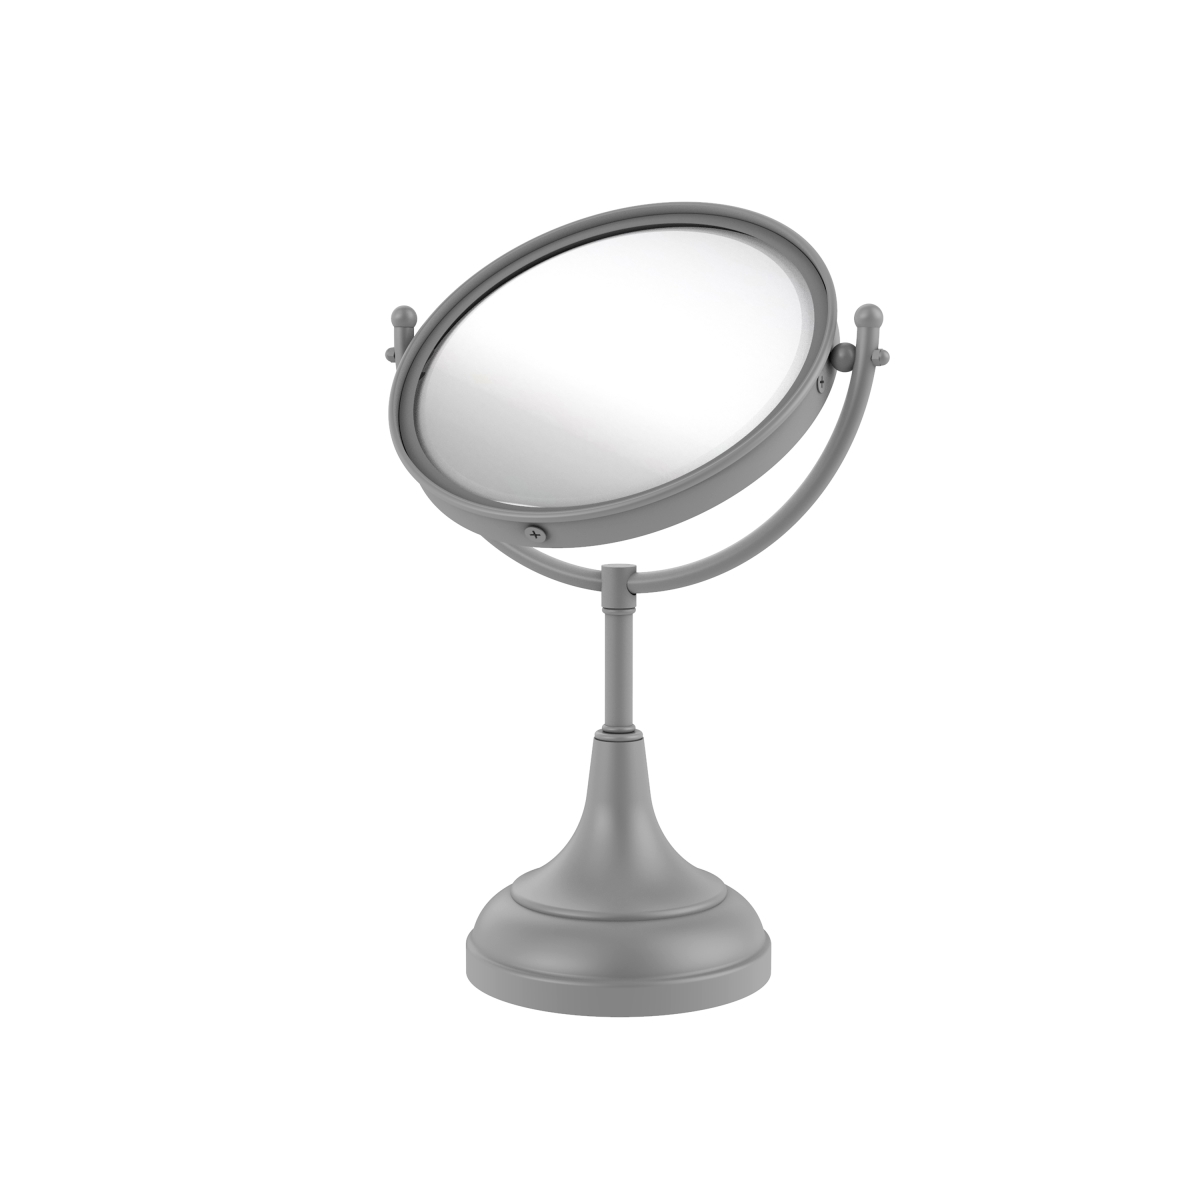 Picture of Allied Brass DM-2-2X-GYM 8 in. Vanity Top Make-Up Mirror 2X Magnification, Matte Gray - 15 x 8 x 8 in.